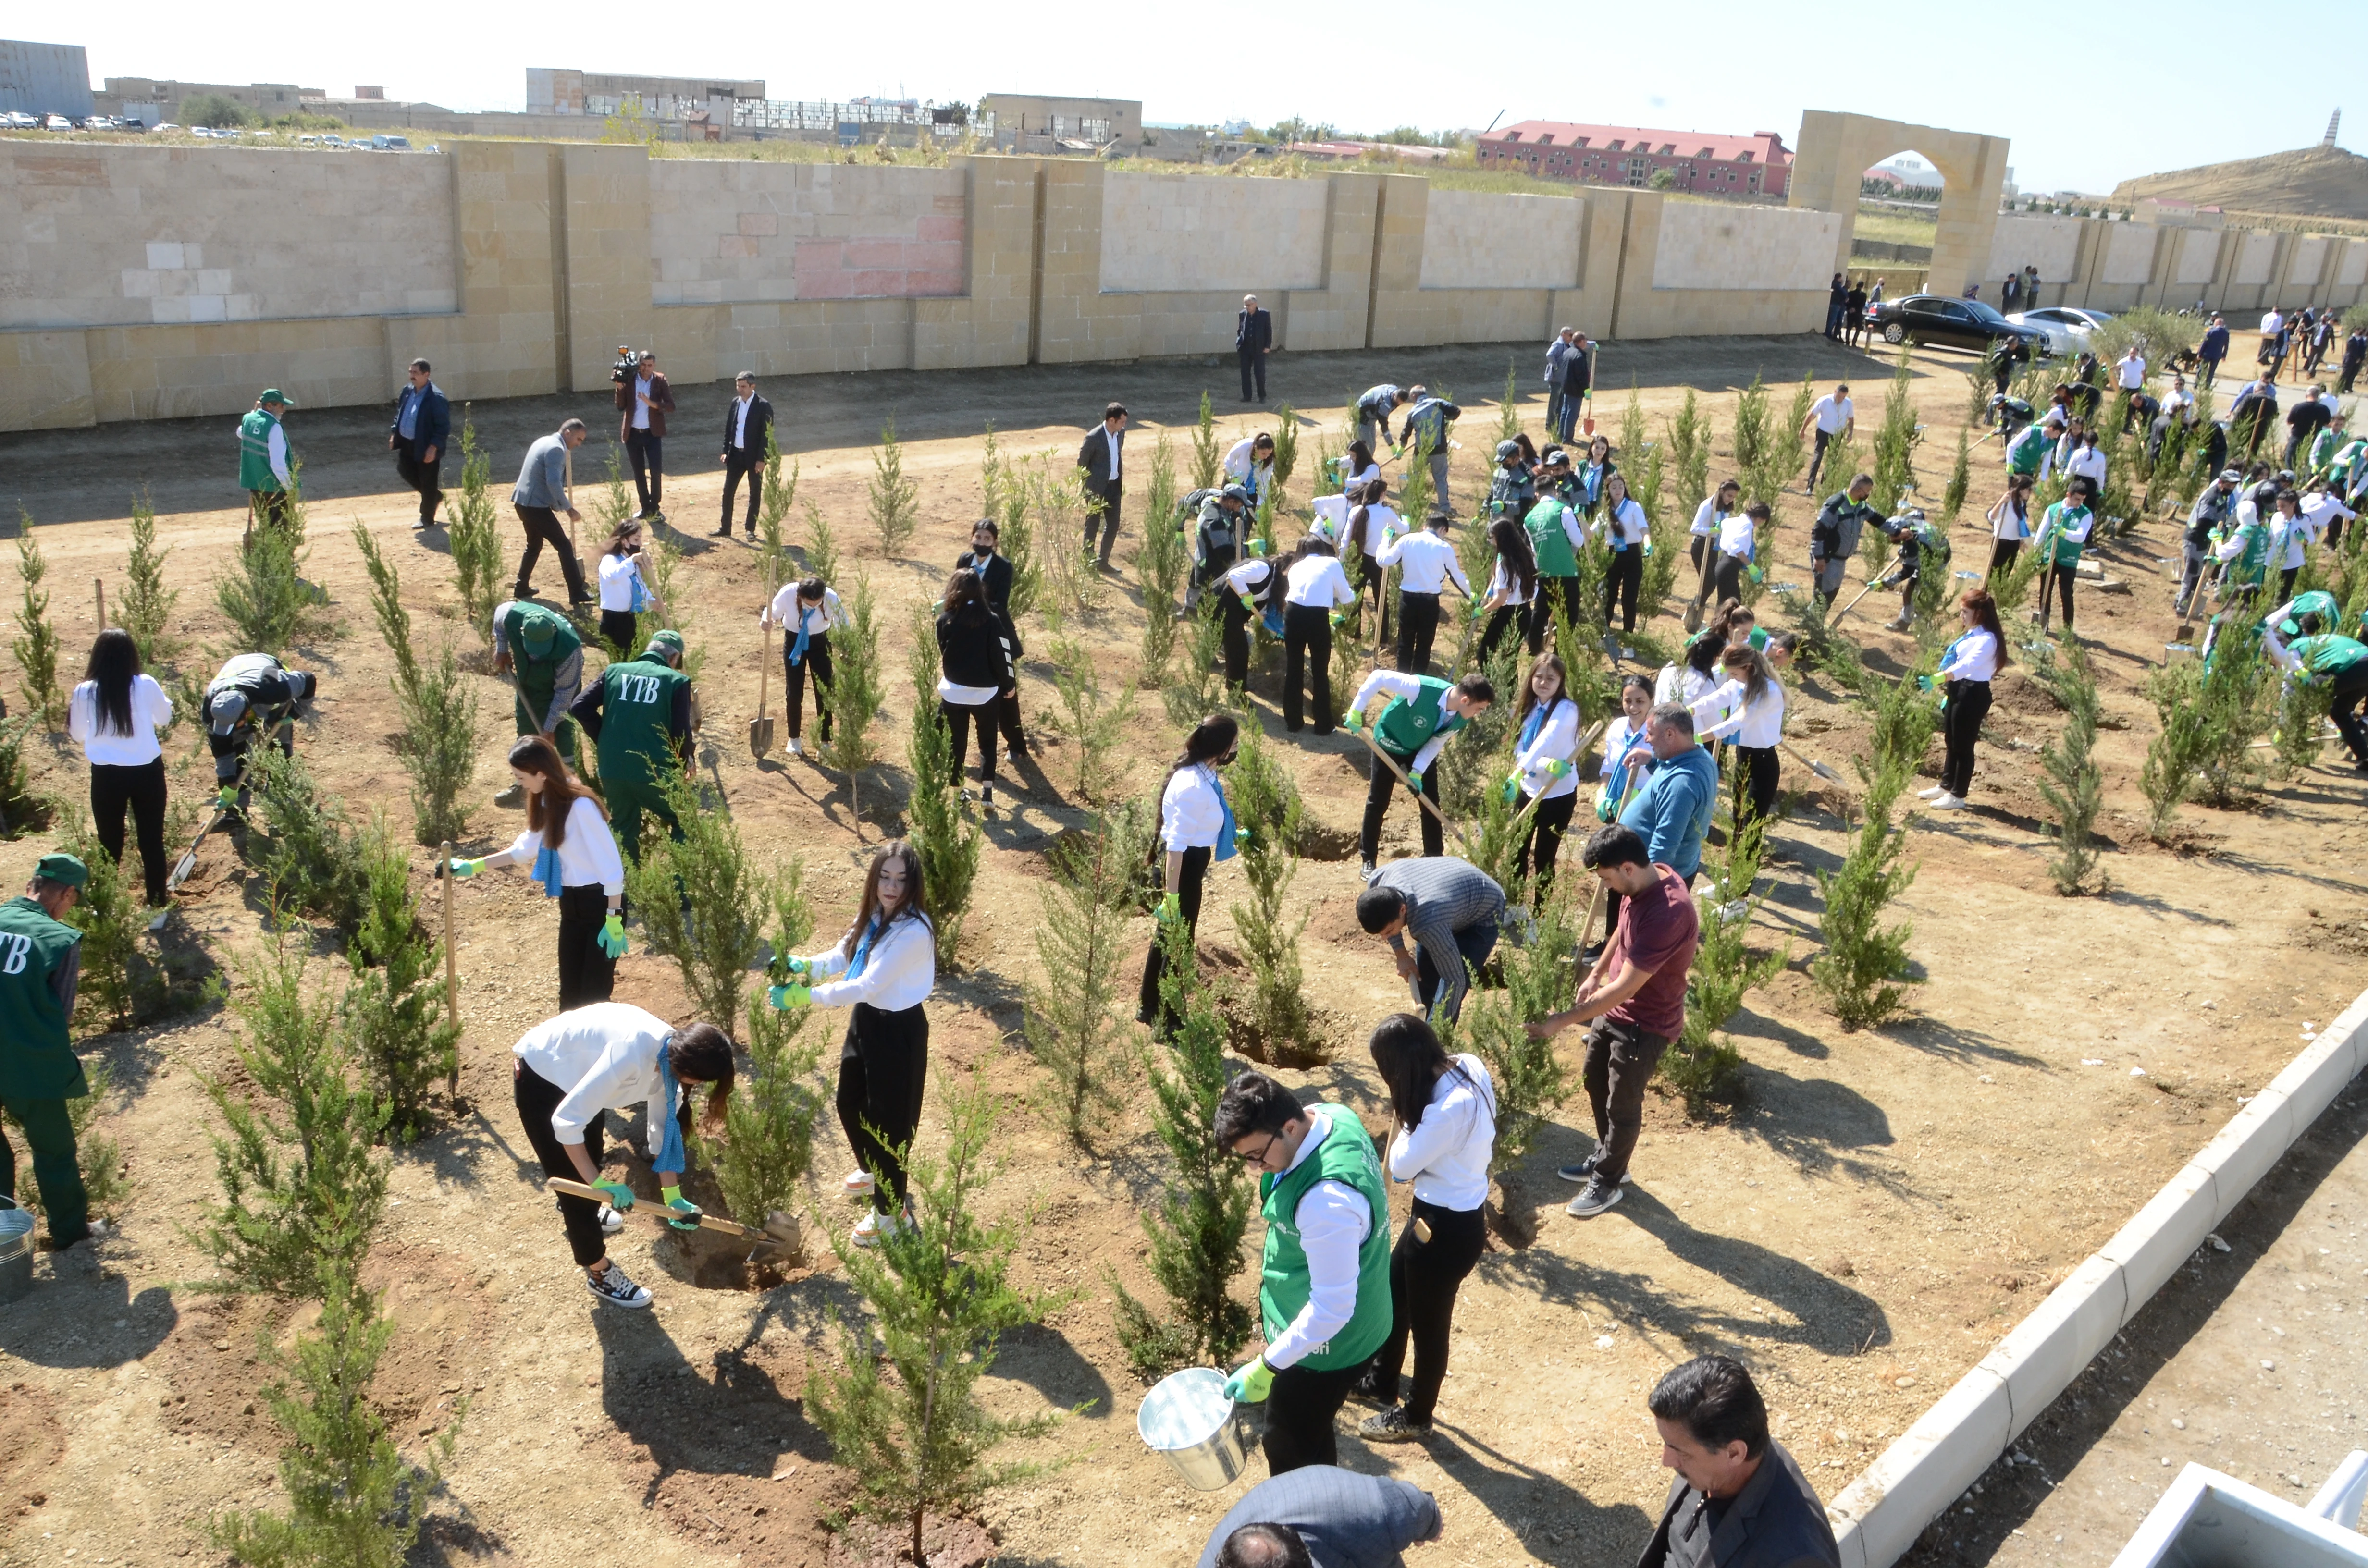 The tree planting action dedicated to September 27- “Day of the Remembrance” was held